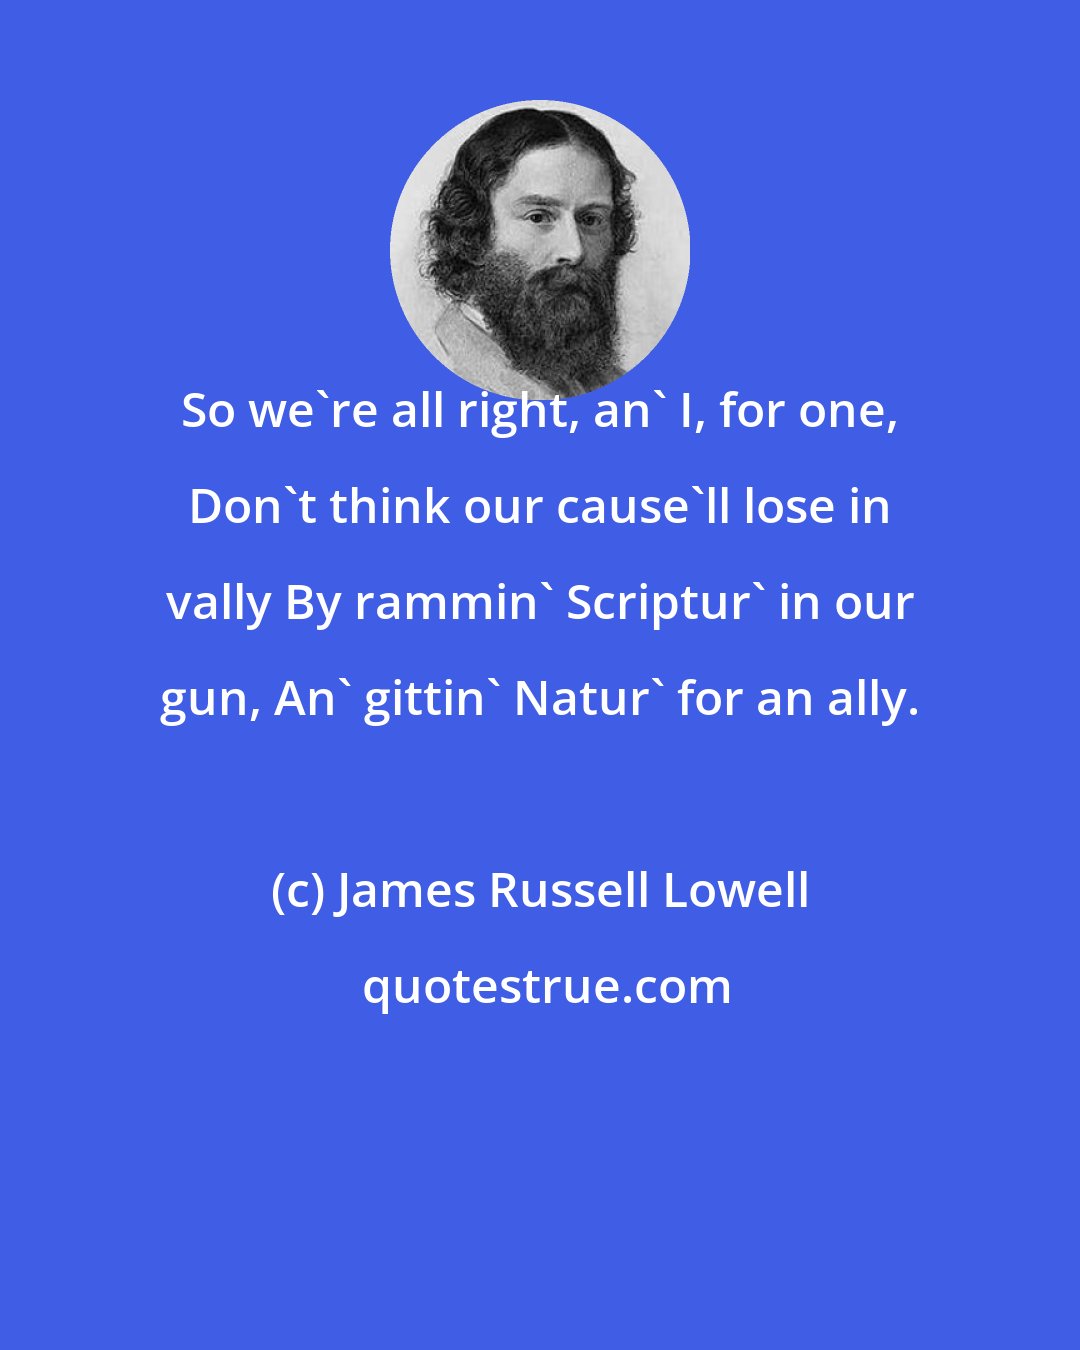 James Russell Lowell: So we're all right, an' I, for one, Don't think our cause'll lose in vally By rammin' Scriptur' in our gun, An' gittin' Natur' for an ally.